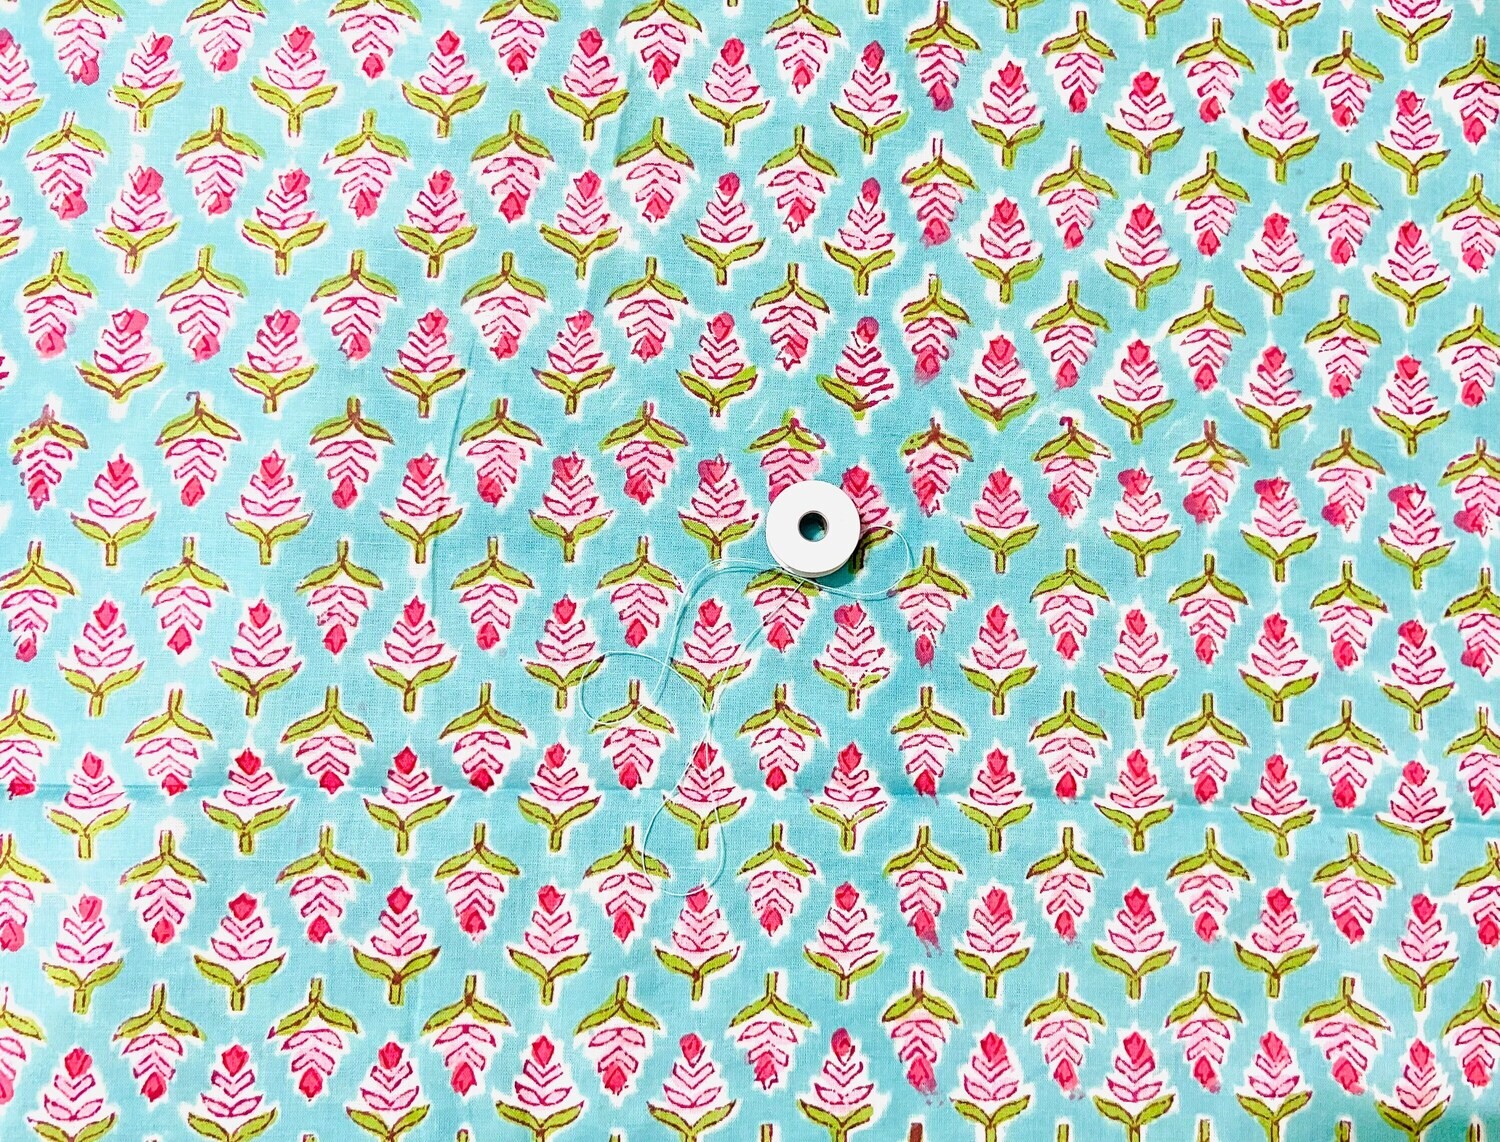 Small Floral Hand Block Print Cotton Fabric for Dressmaking, Sewing, Quilting, Crafting, Mint Green, 44 Inch Wide